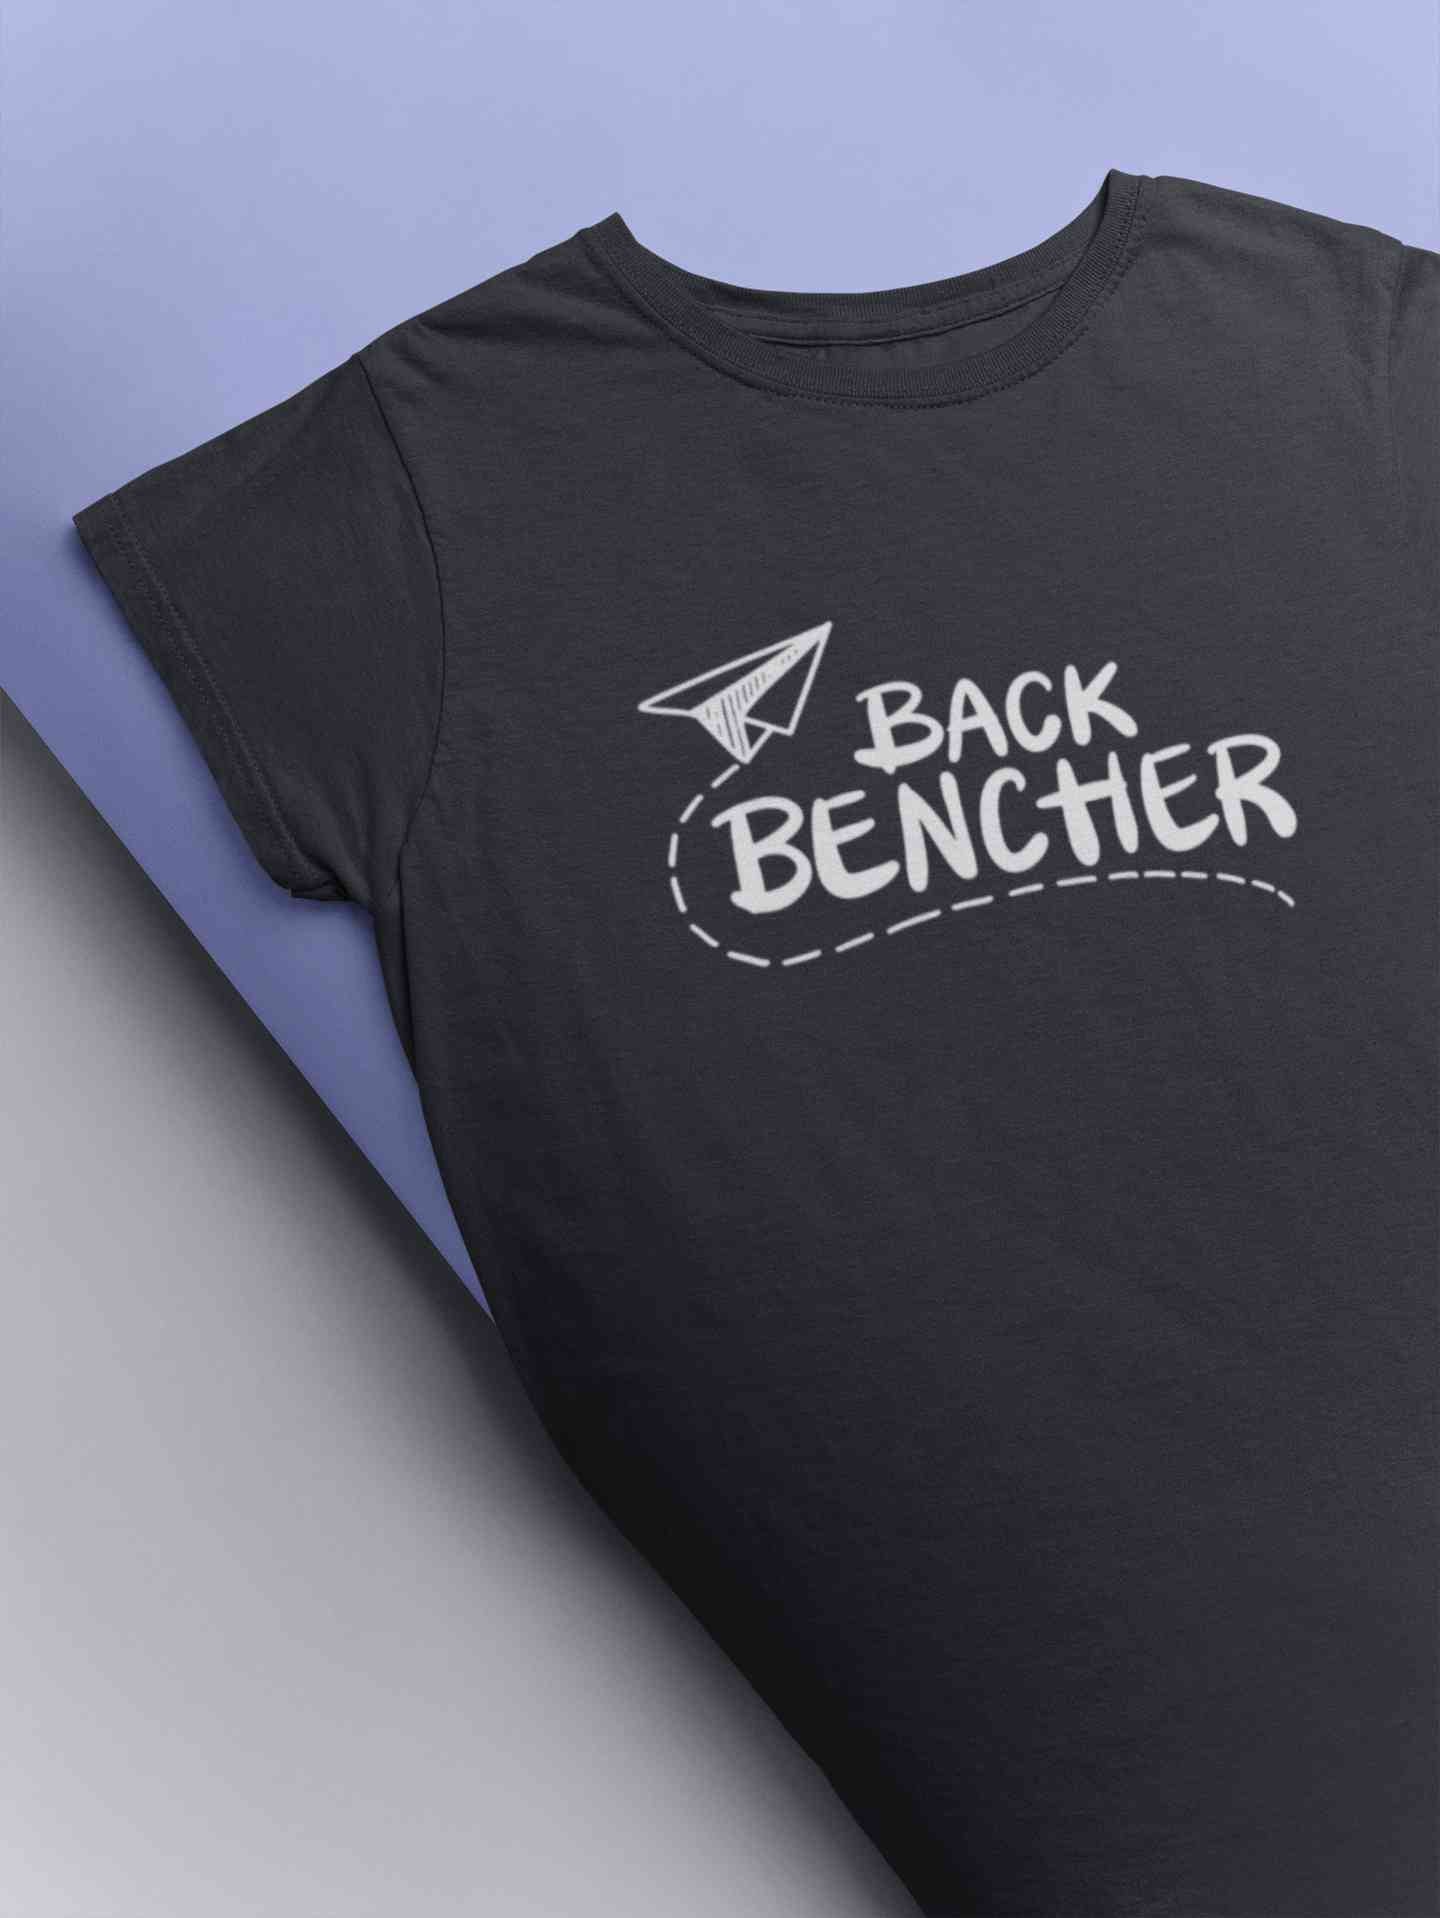 Buy RAINBOWTEES Back Benchers Friends Tshirts-Set of 4 (Black, Mail The  Sizes to Gangsters.4006@gmail.com) at Amazon.in